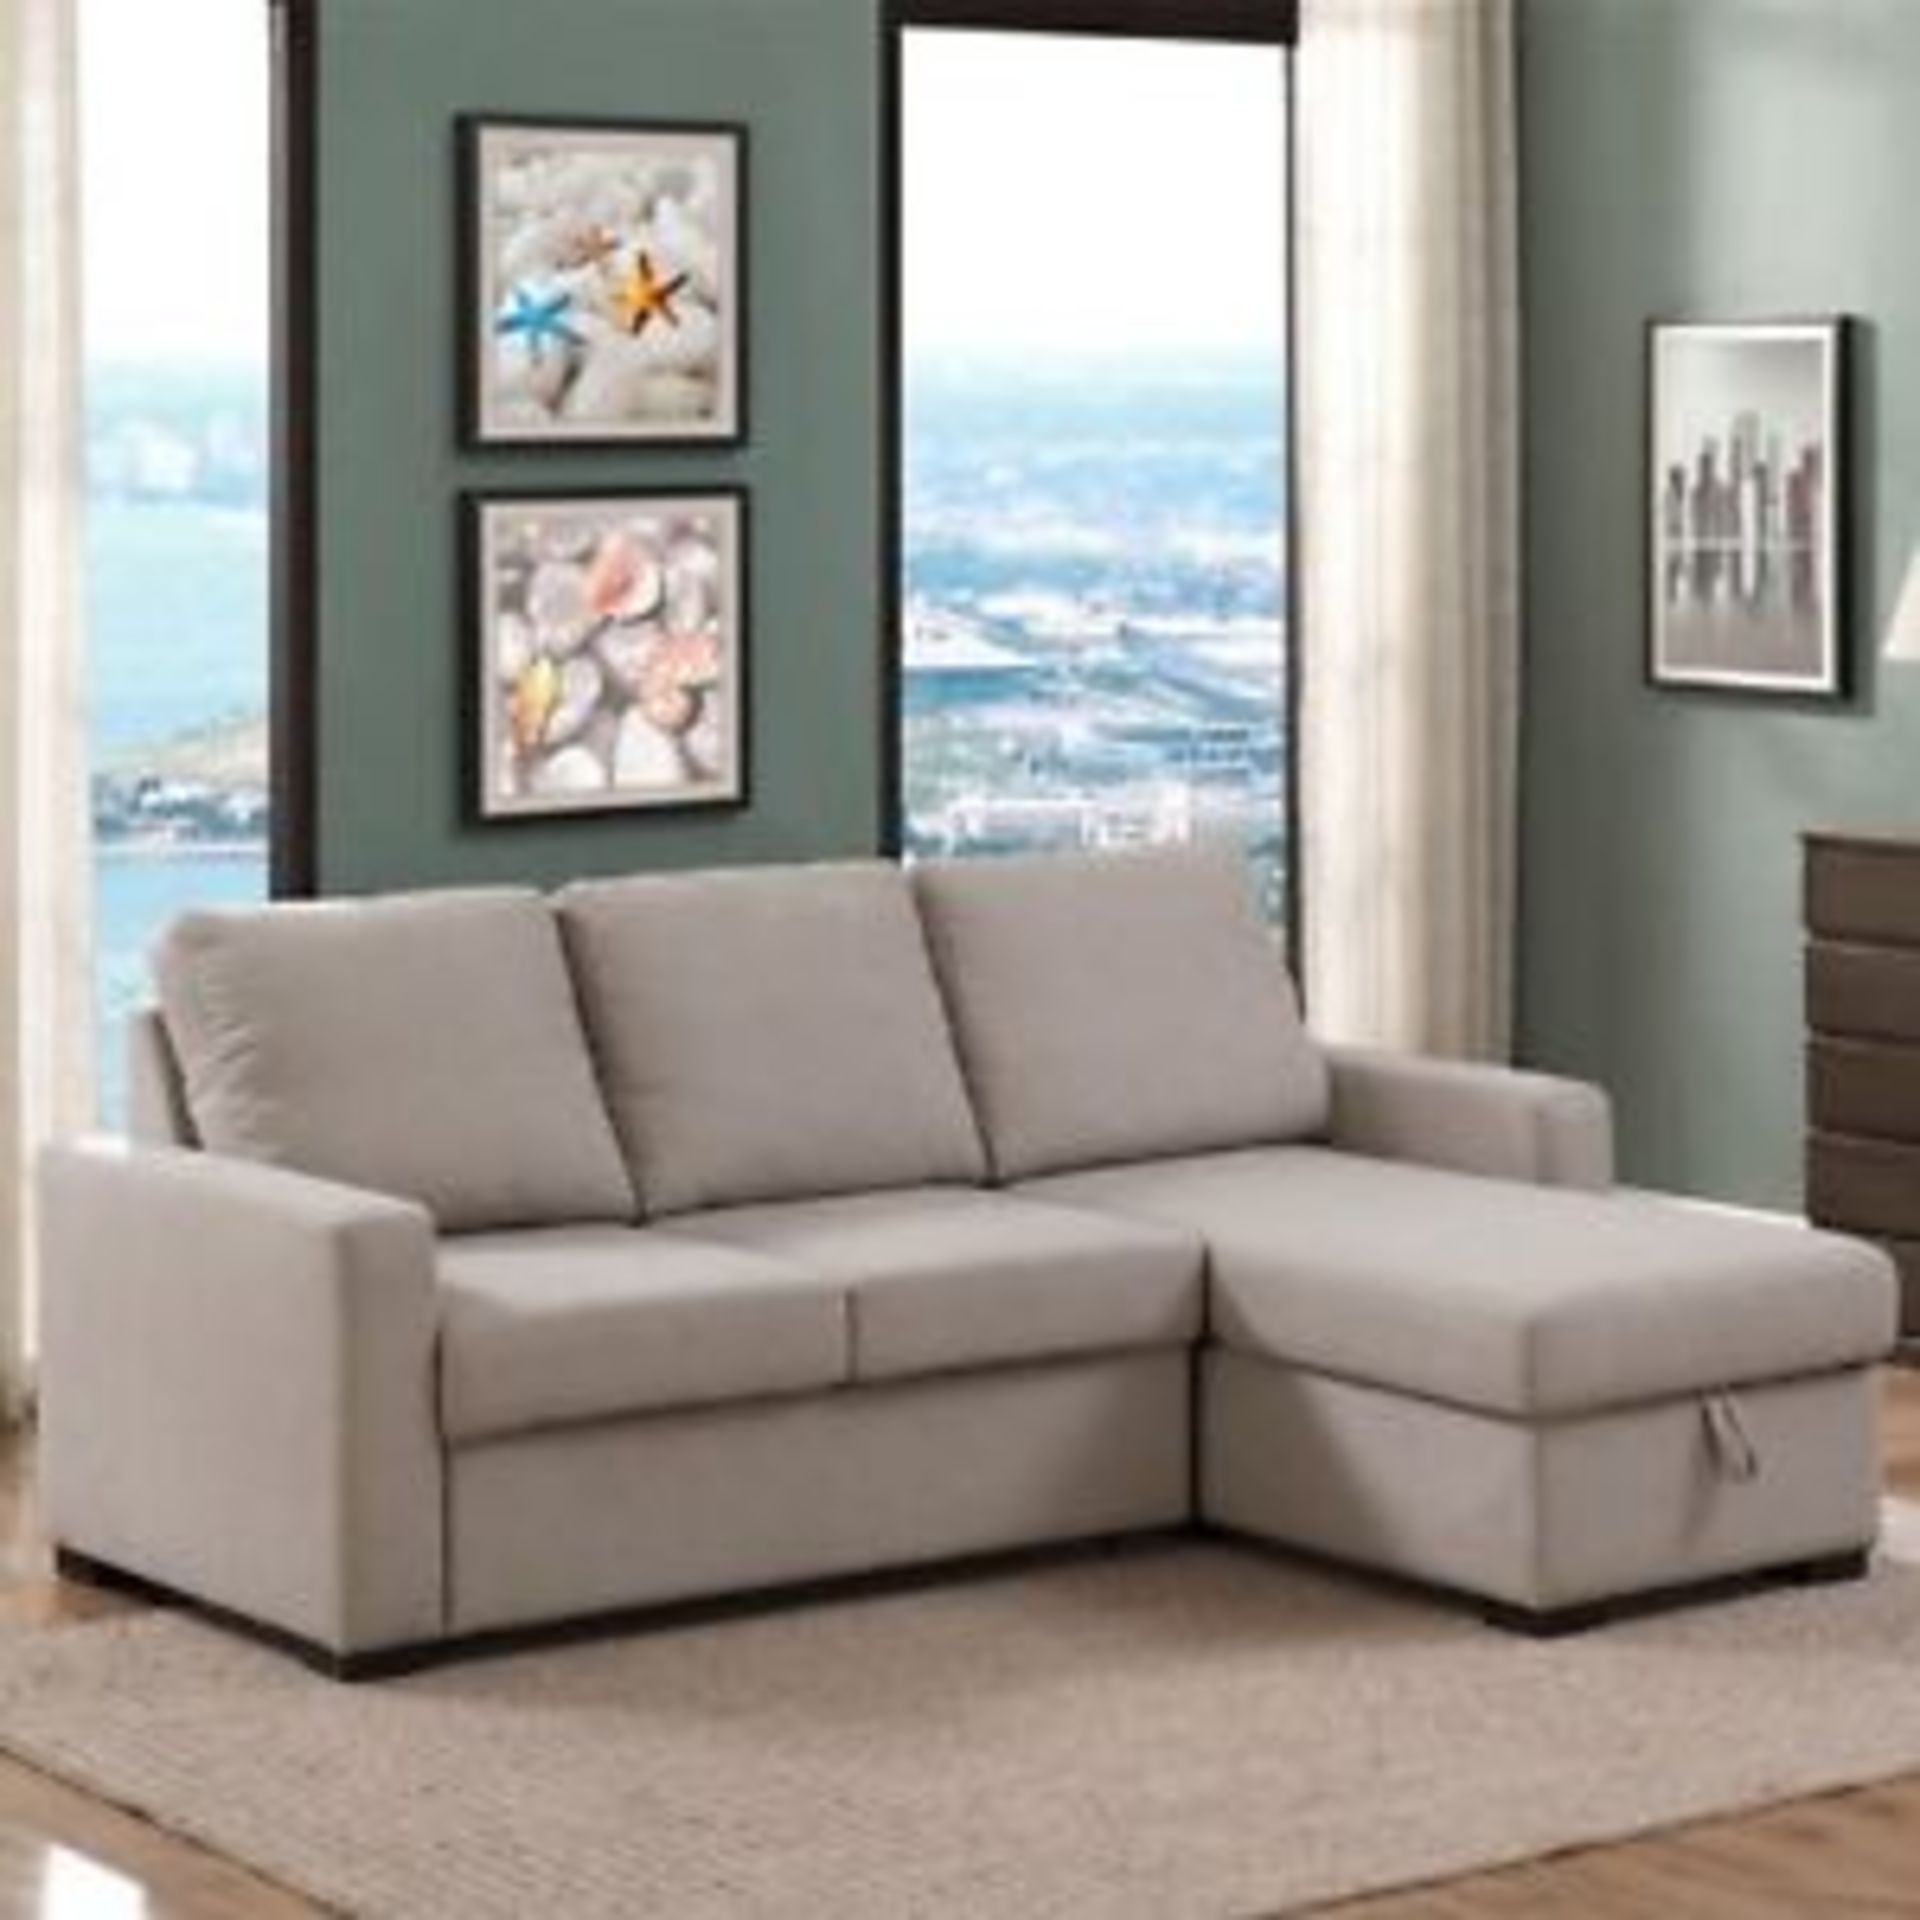 Polaski 3 Seater Pull out Sofa Bed Chaise with Built in Ottoman under chaise, mechanism is fully